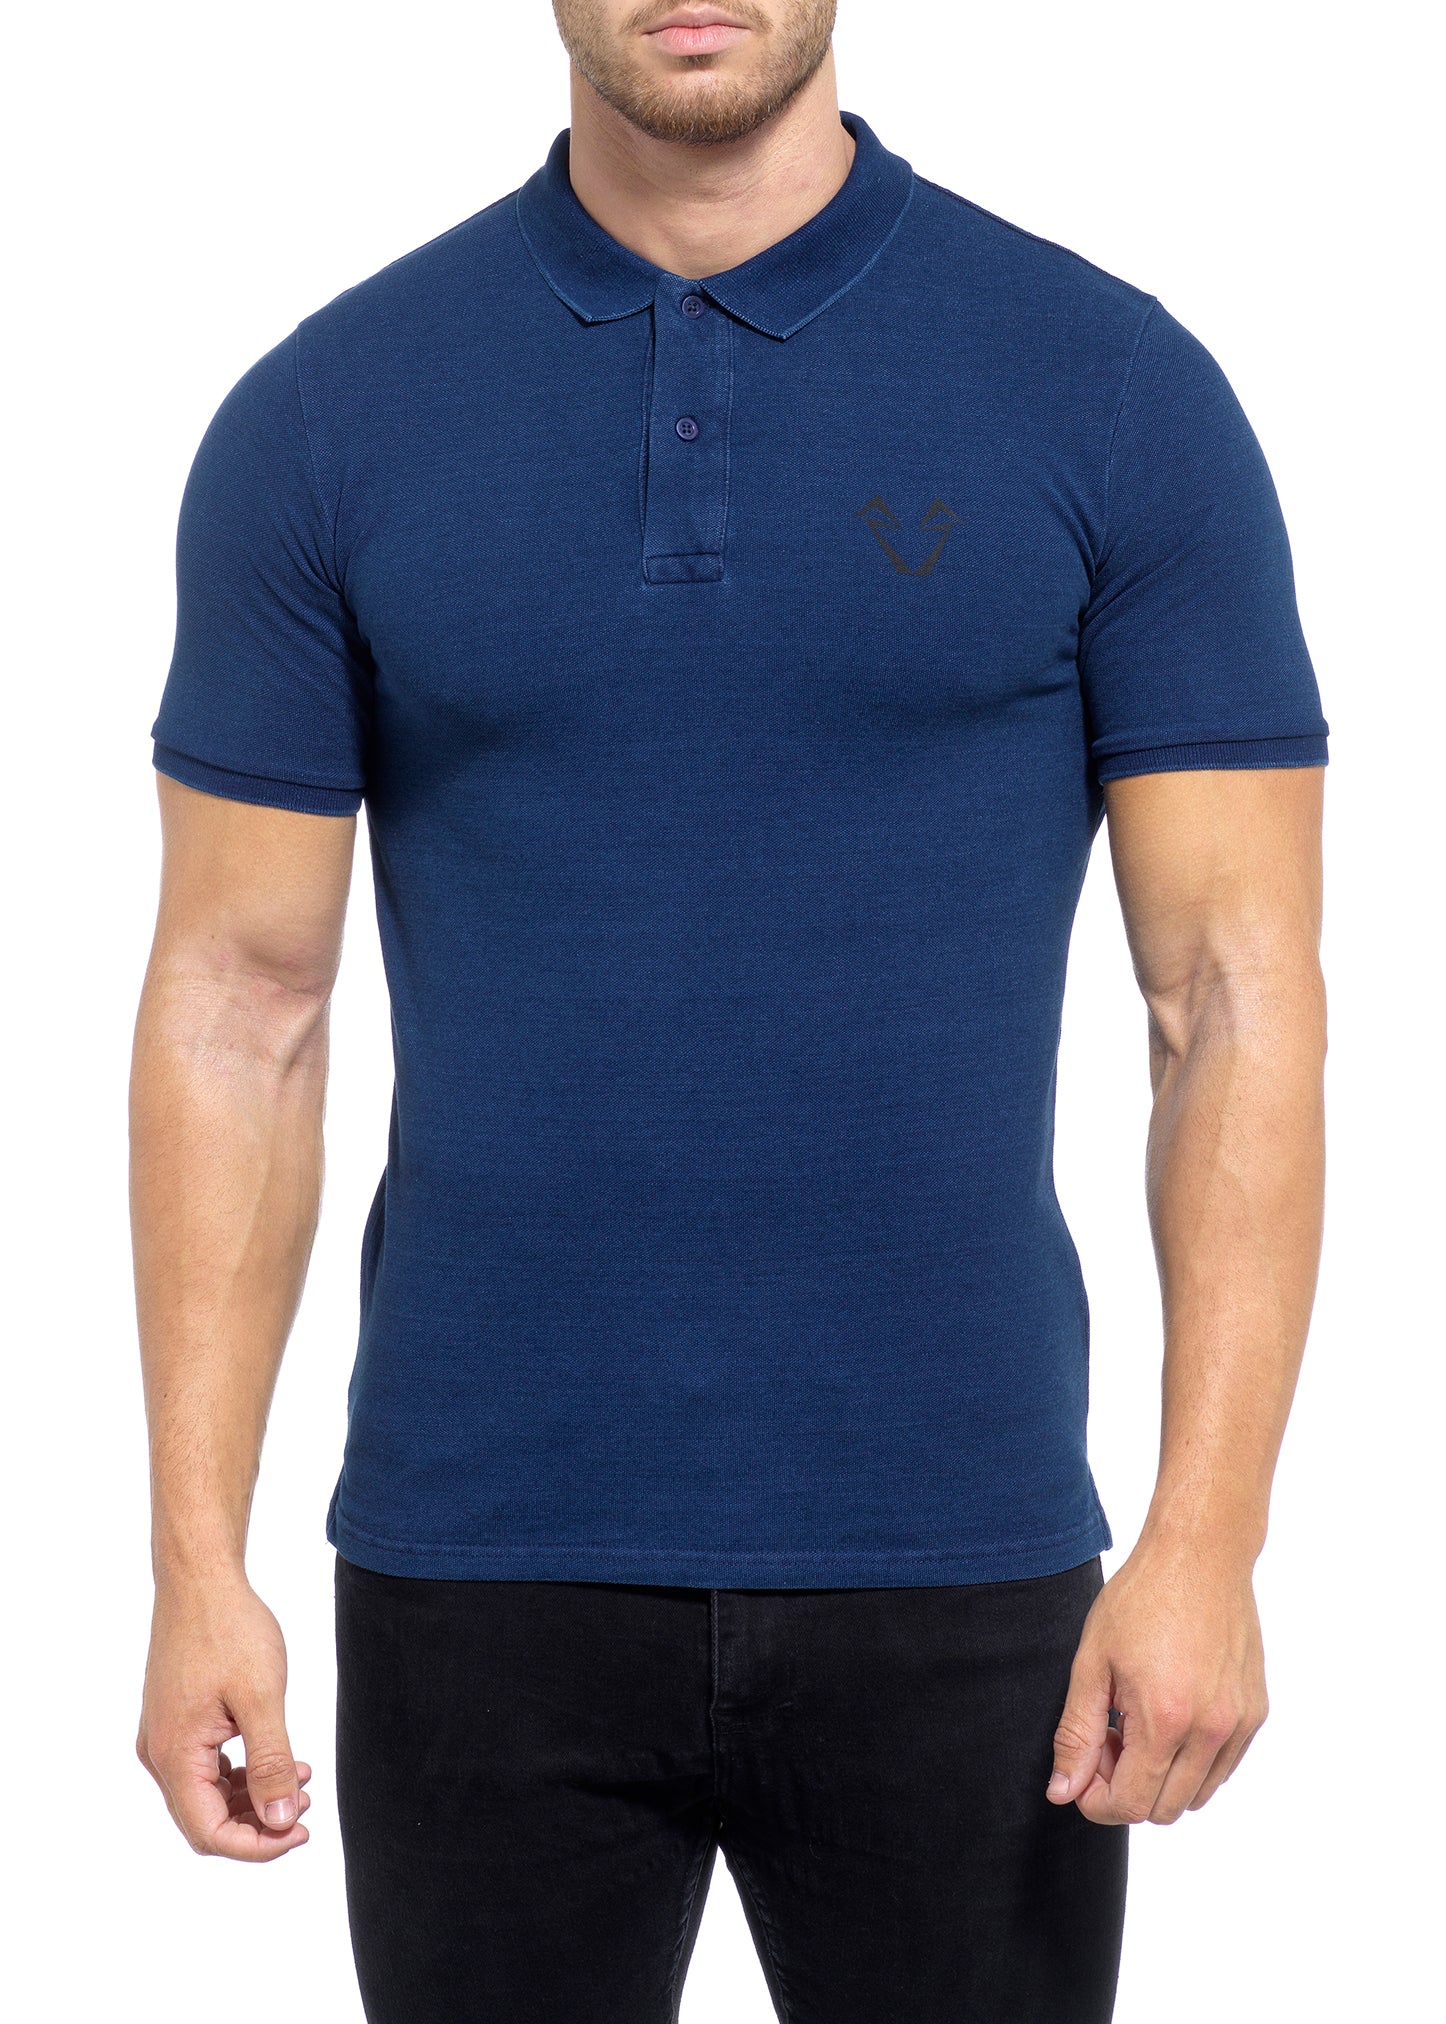 Mens Denim Muscle Fit Polo Shirts